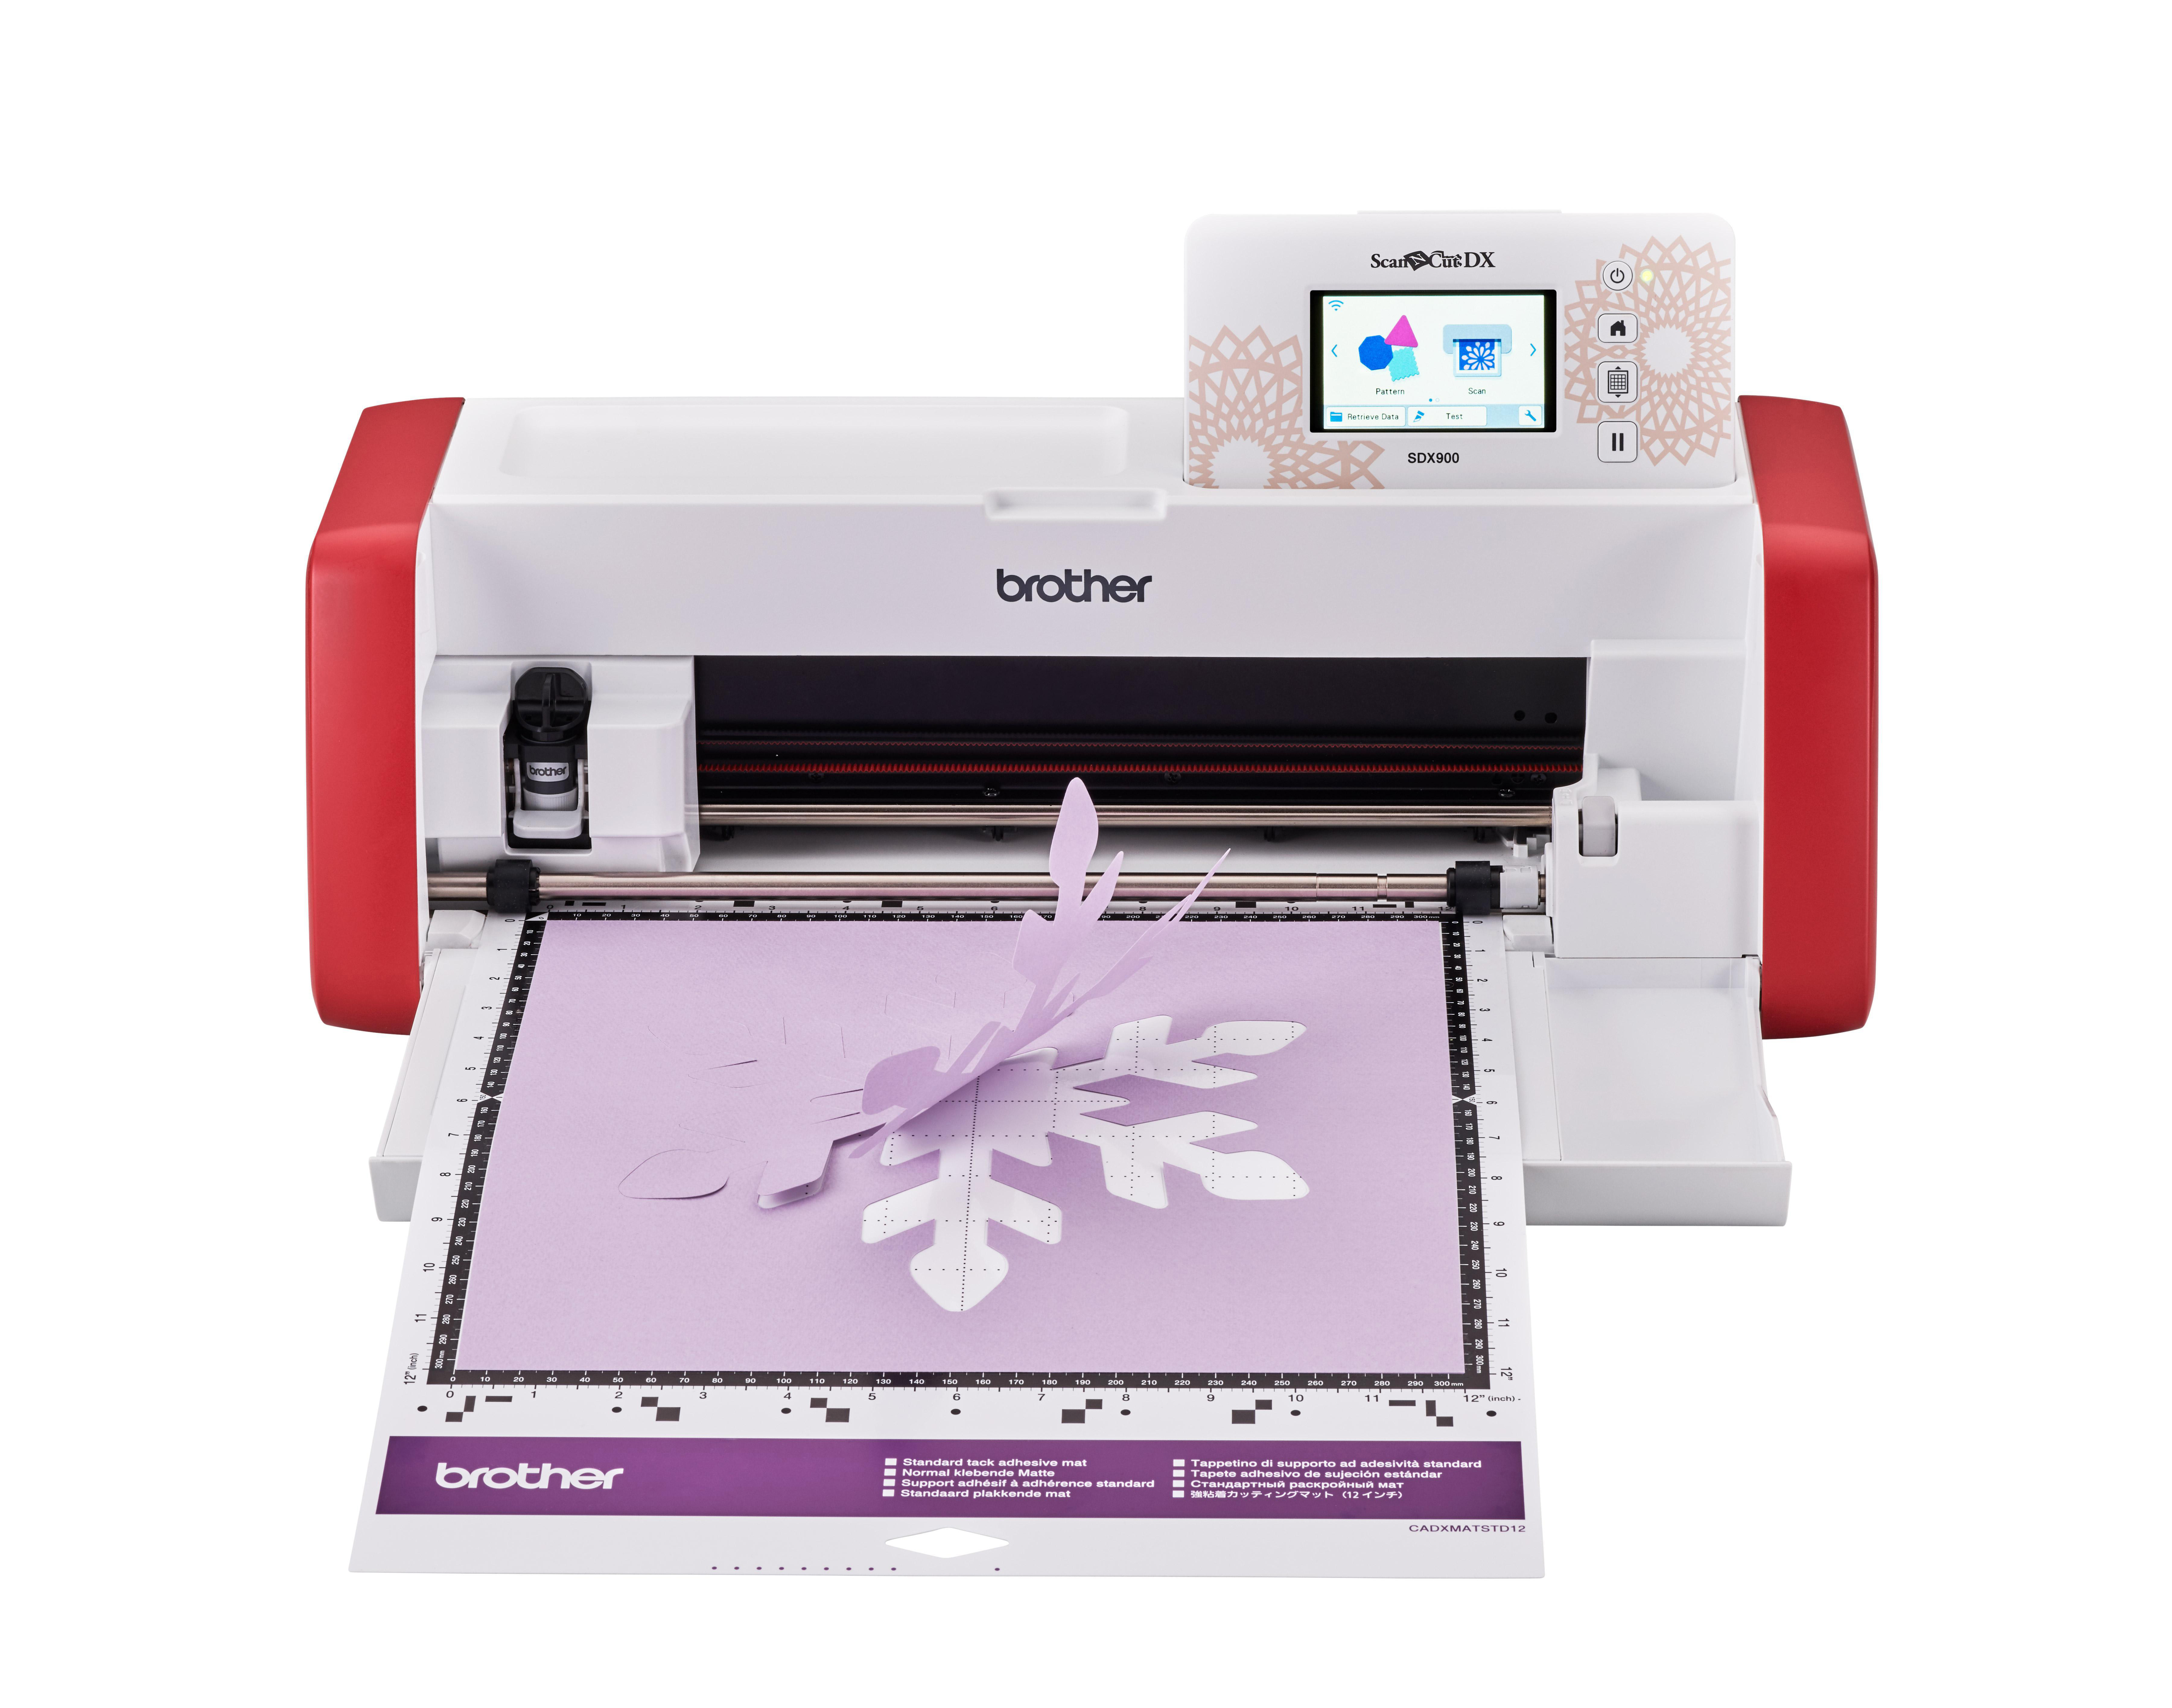 BROTHER ScanNCut DX900 Plotter